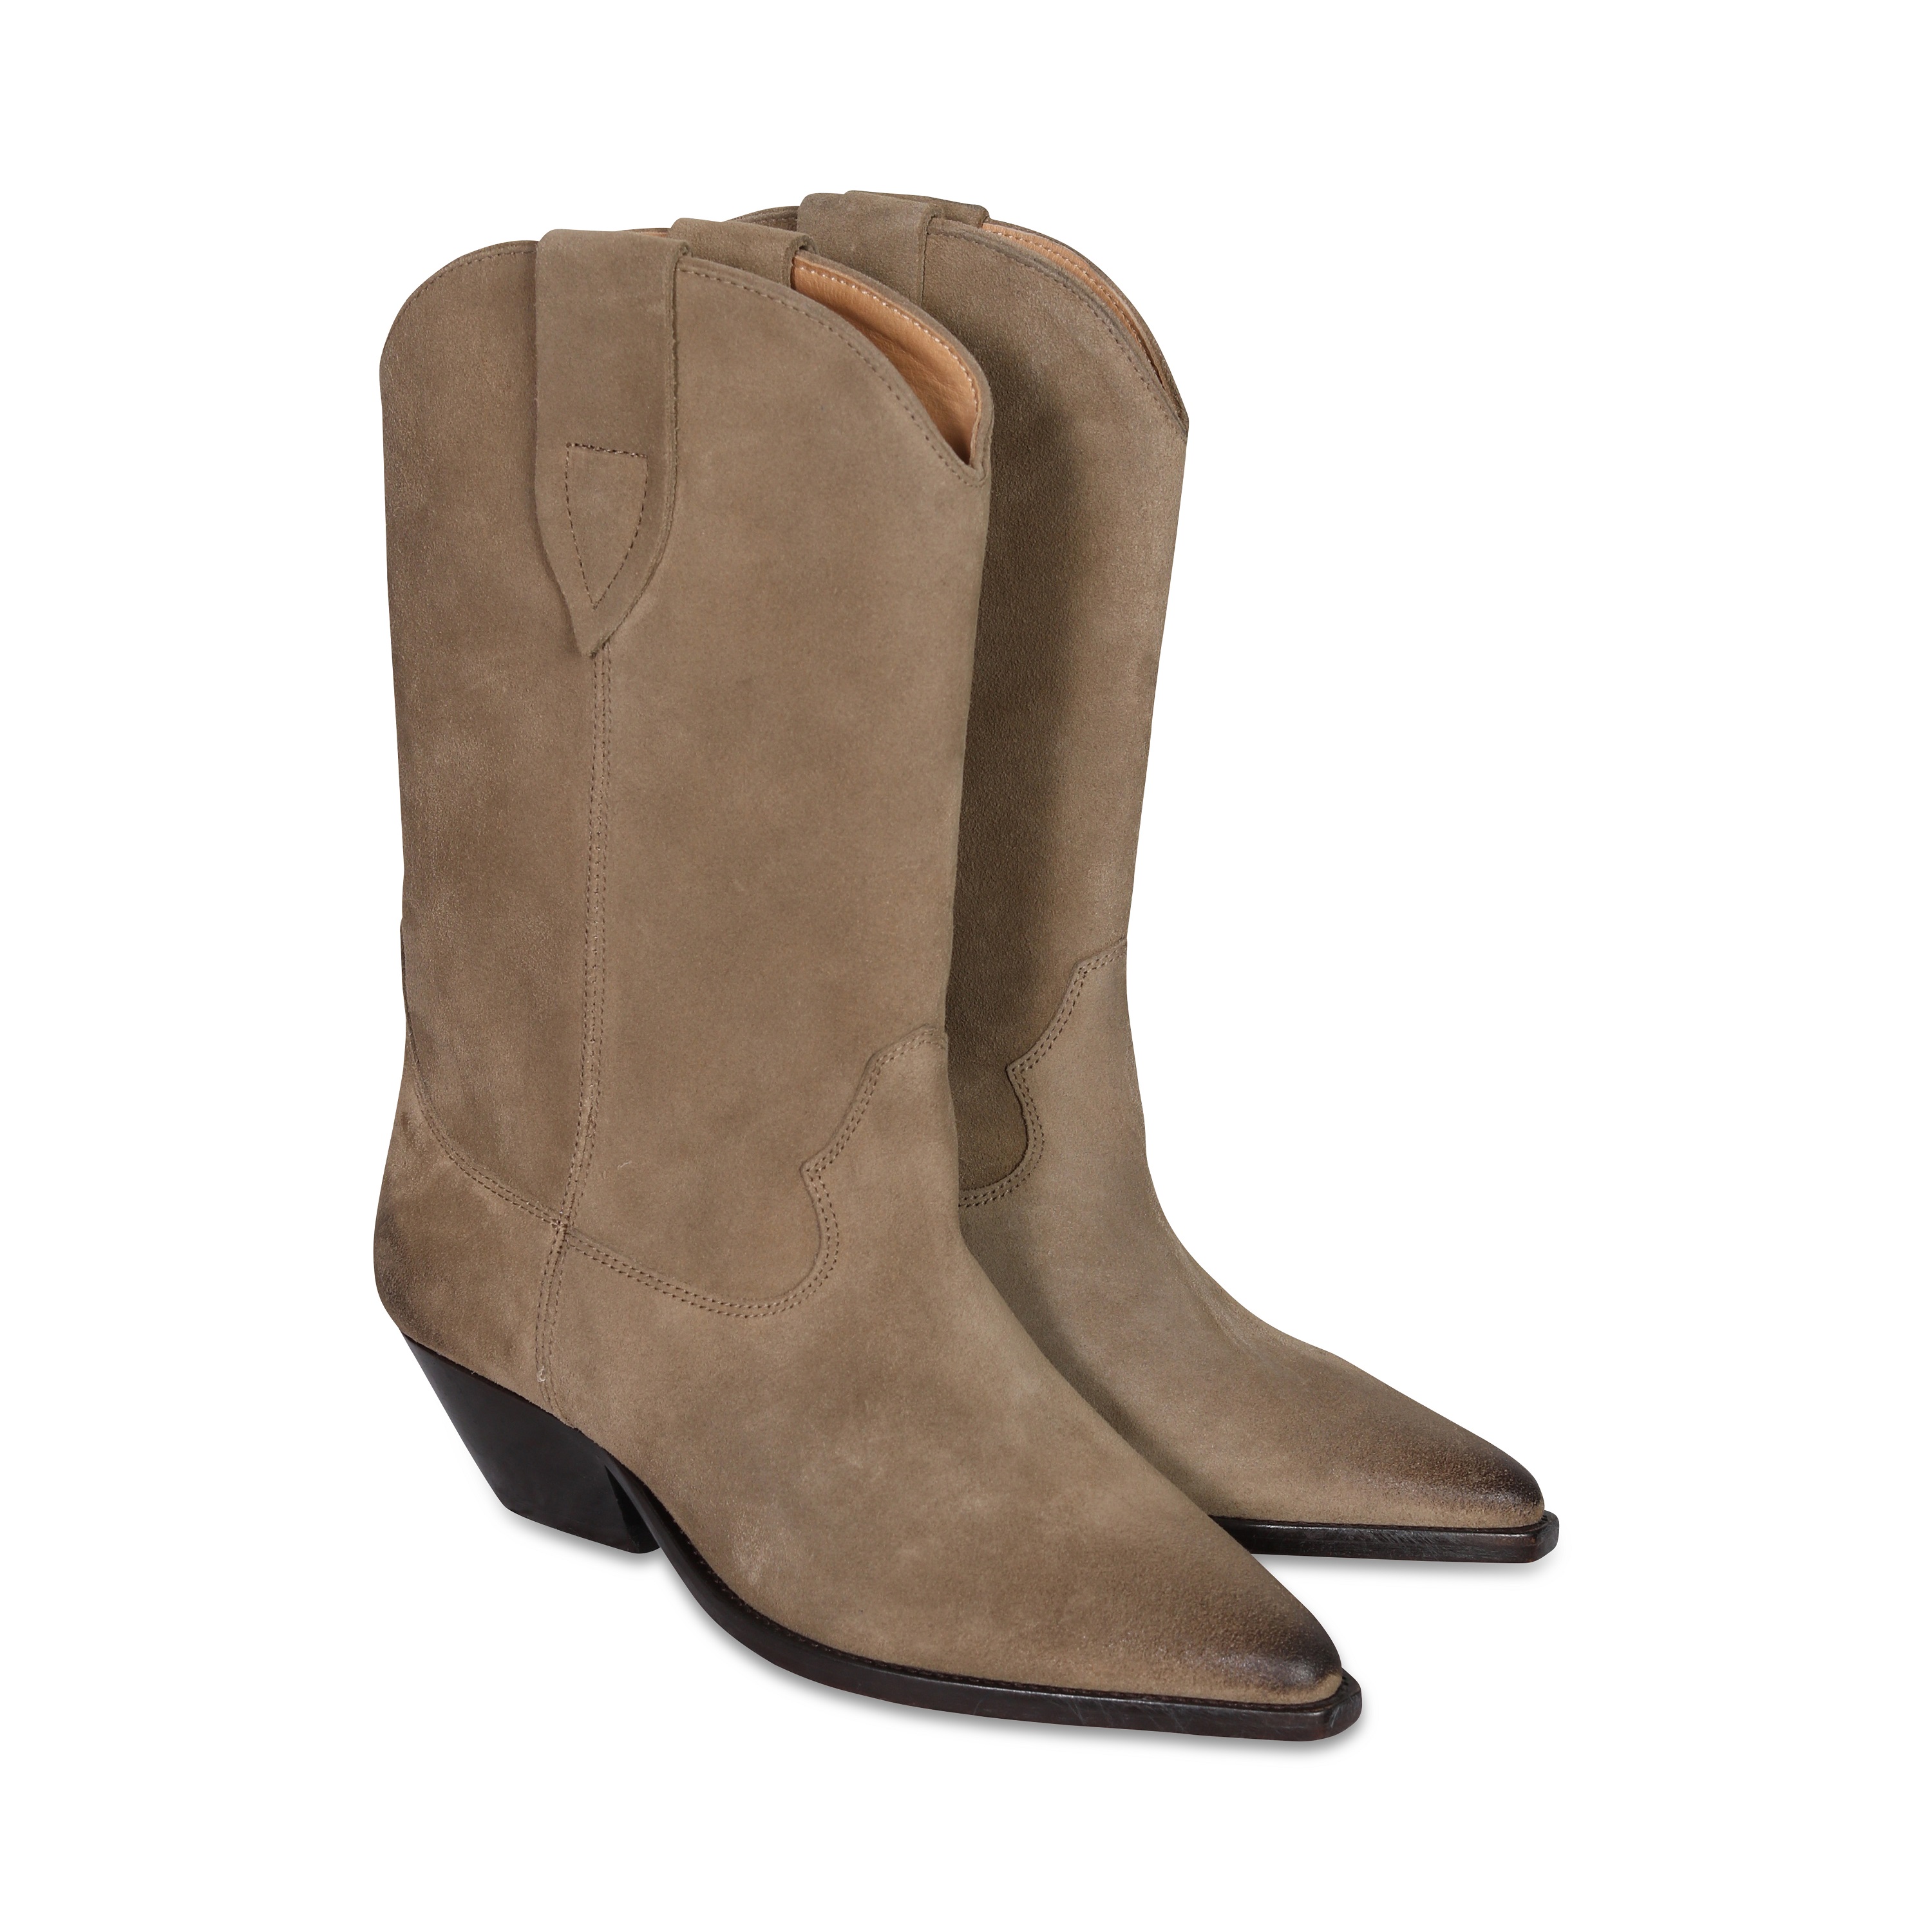 Isabel Marant Duerto Boots in Taupe 37